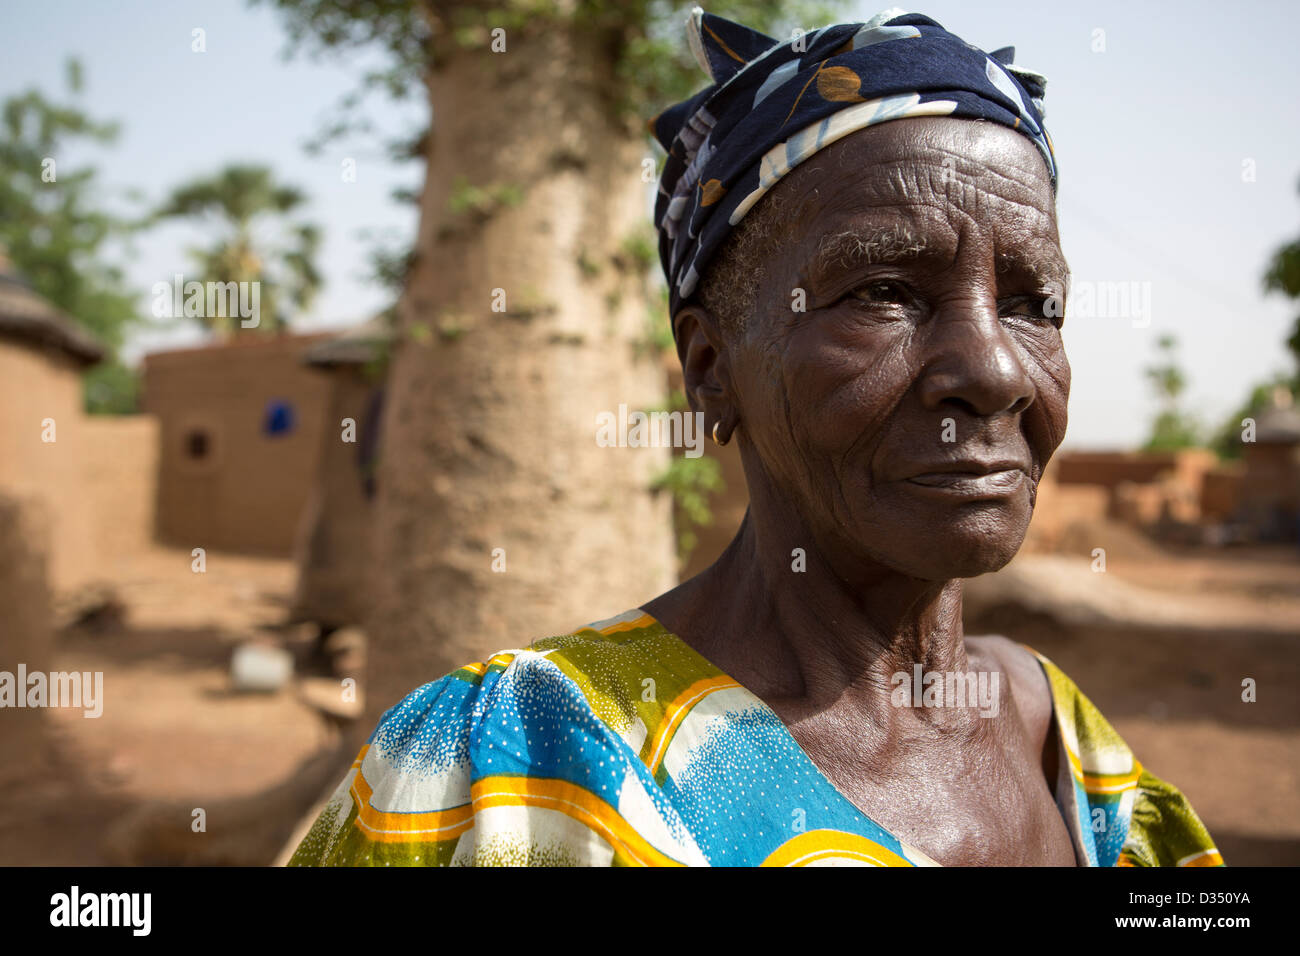 Reo, Burkina Faso, May 2012: Marie Kanyala, 79, in her compound with her Boabab tree. Stock Photo